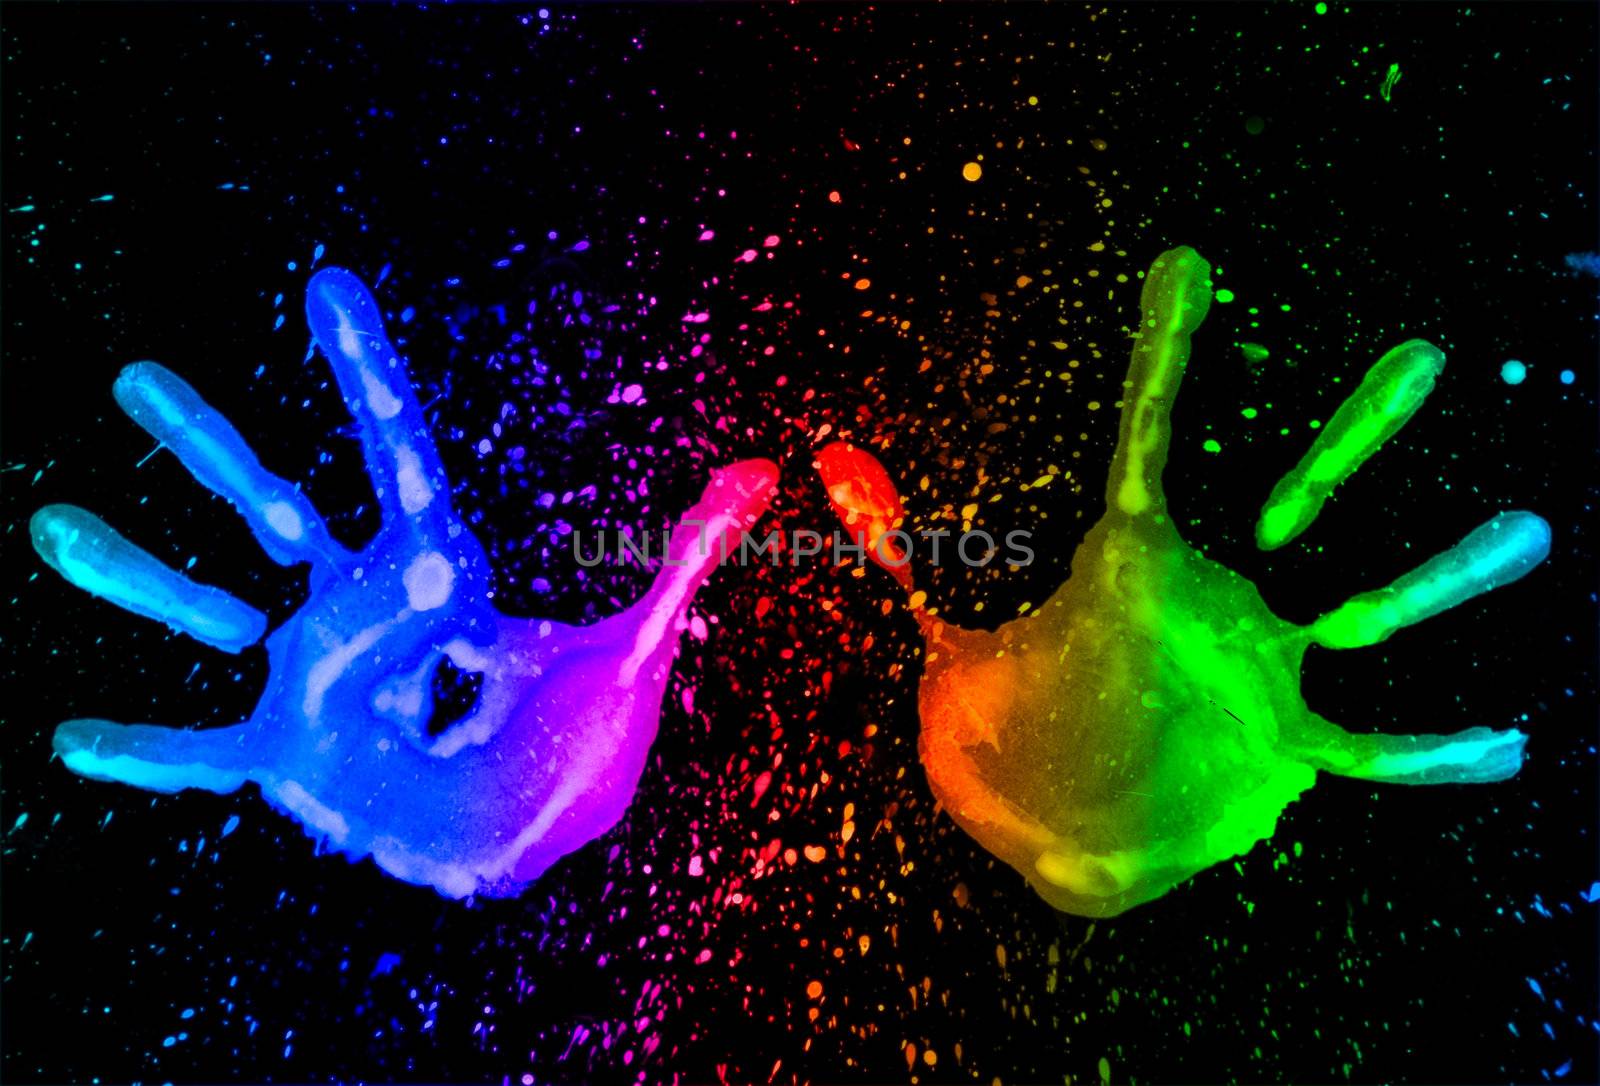 mark pairs of hands, bright colors